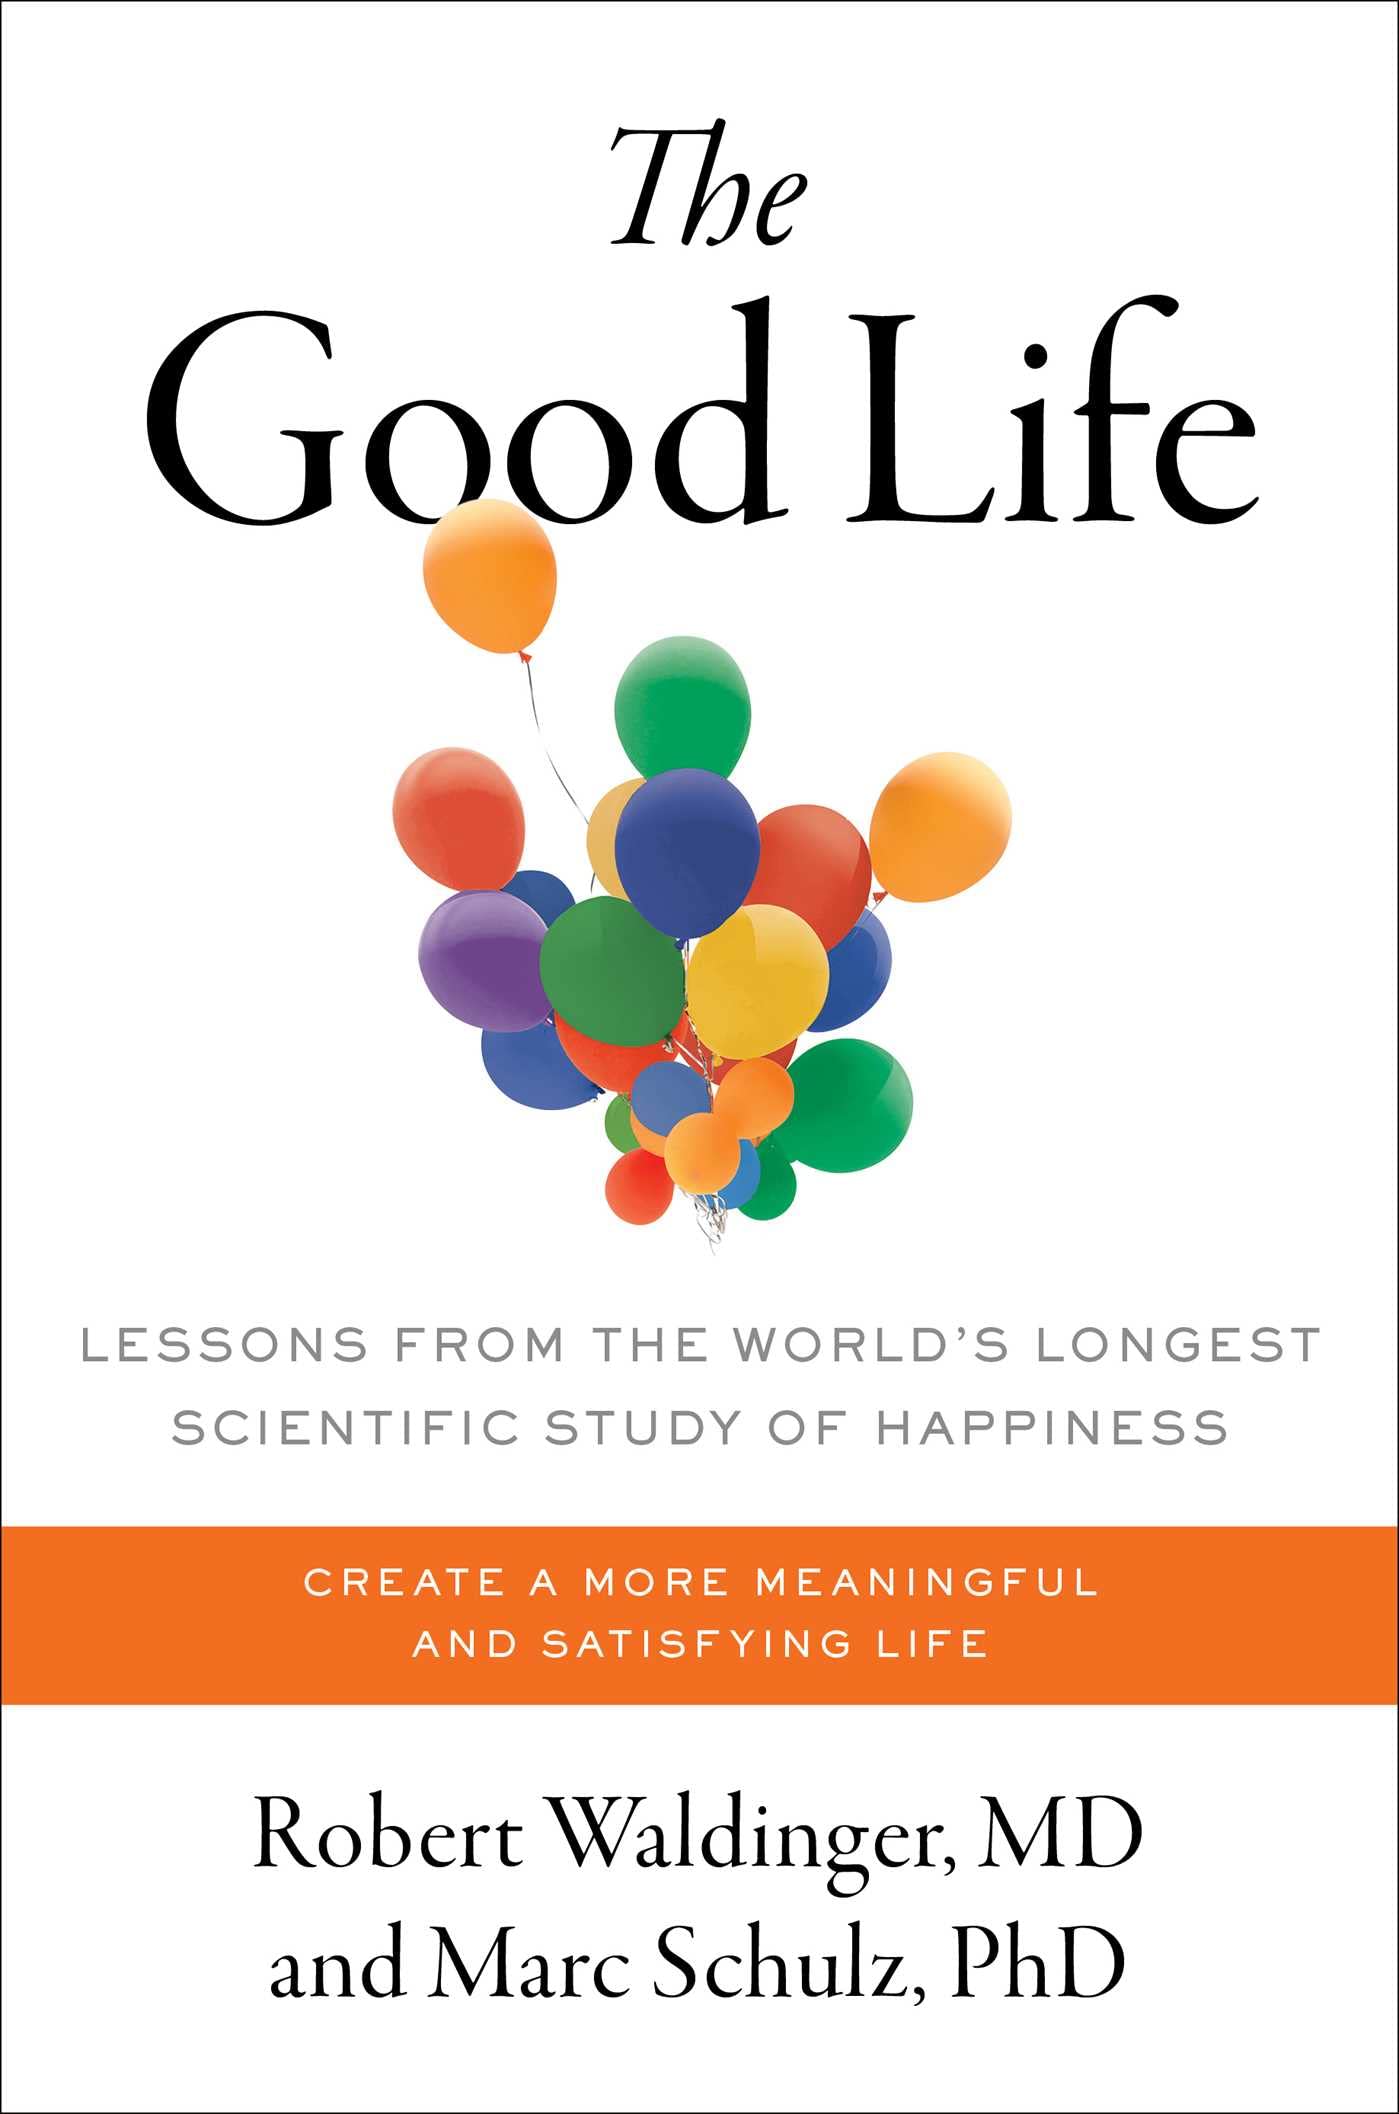 Book review: The Good Life: Lessons from the World’s Longest Scientific Study of Happiness